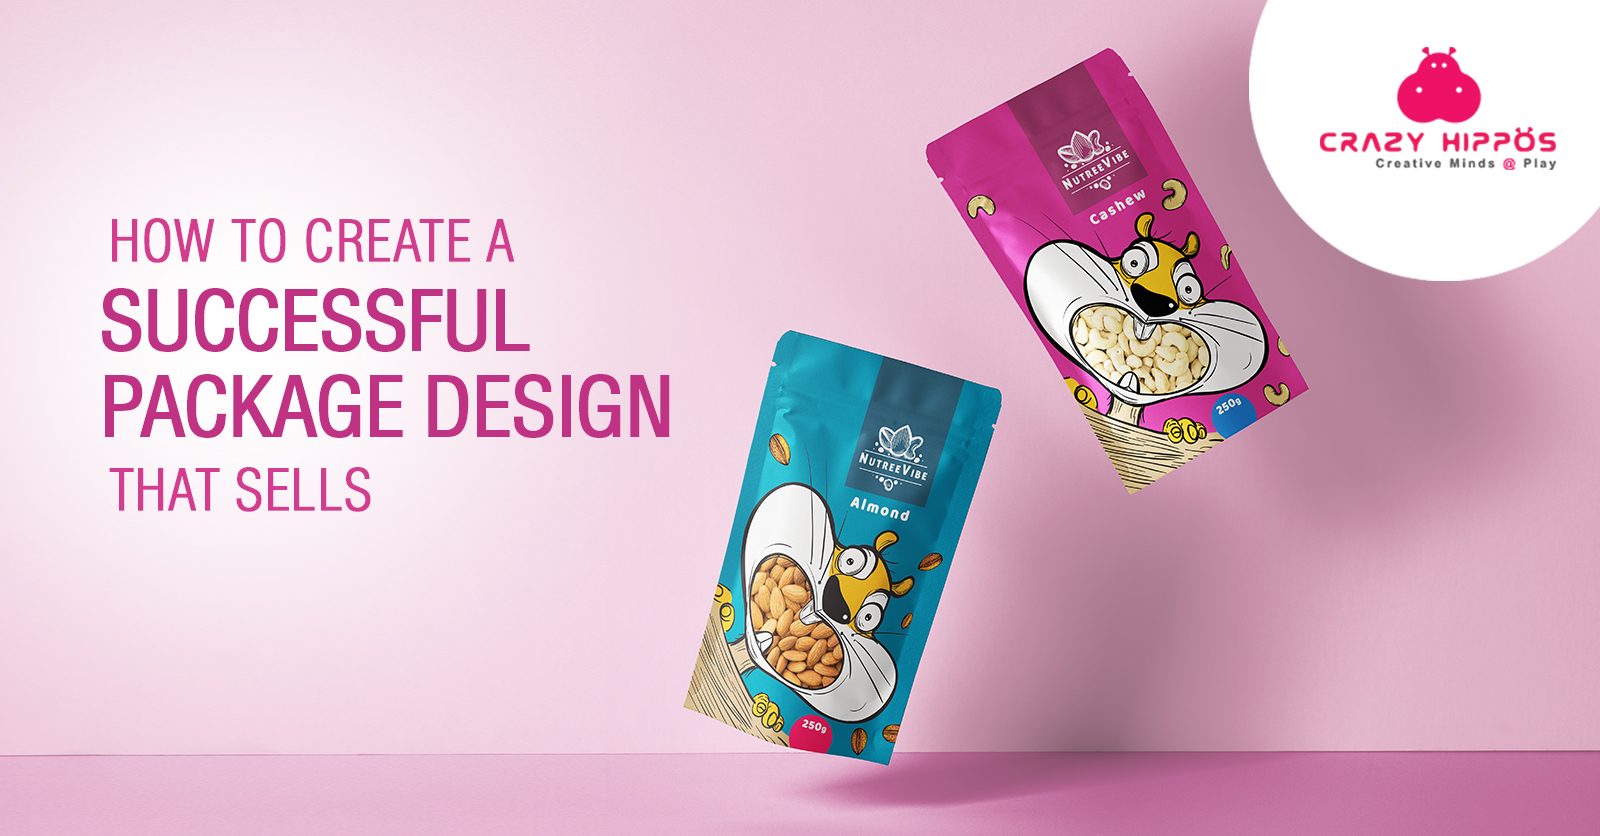 HOW TO CREATE A SUCCESSFUL PACKAGE DESIGN THAT SELLS